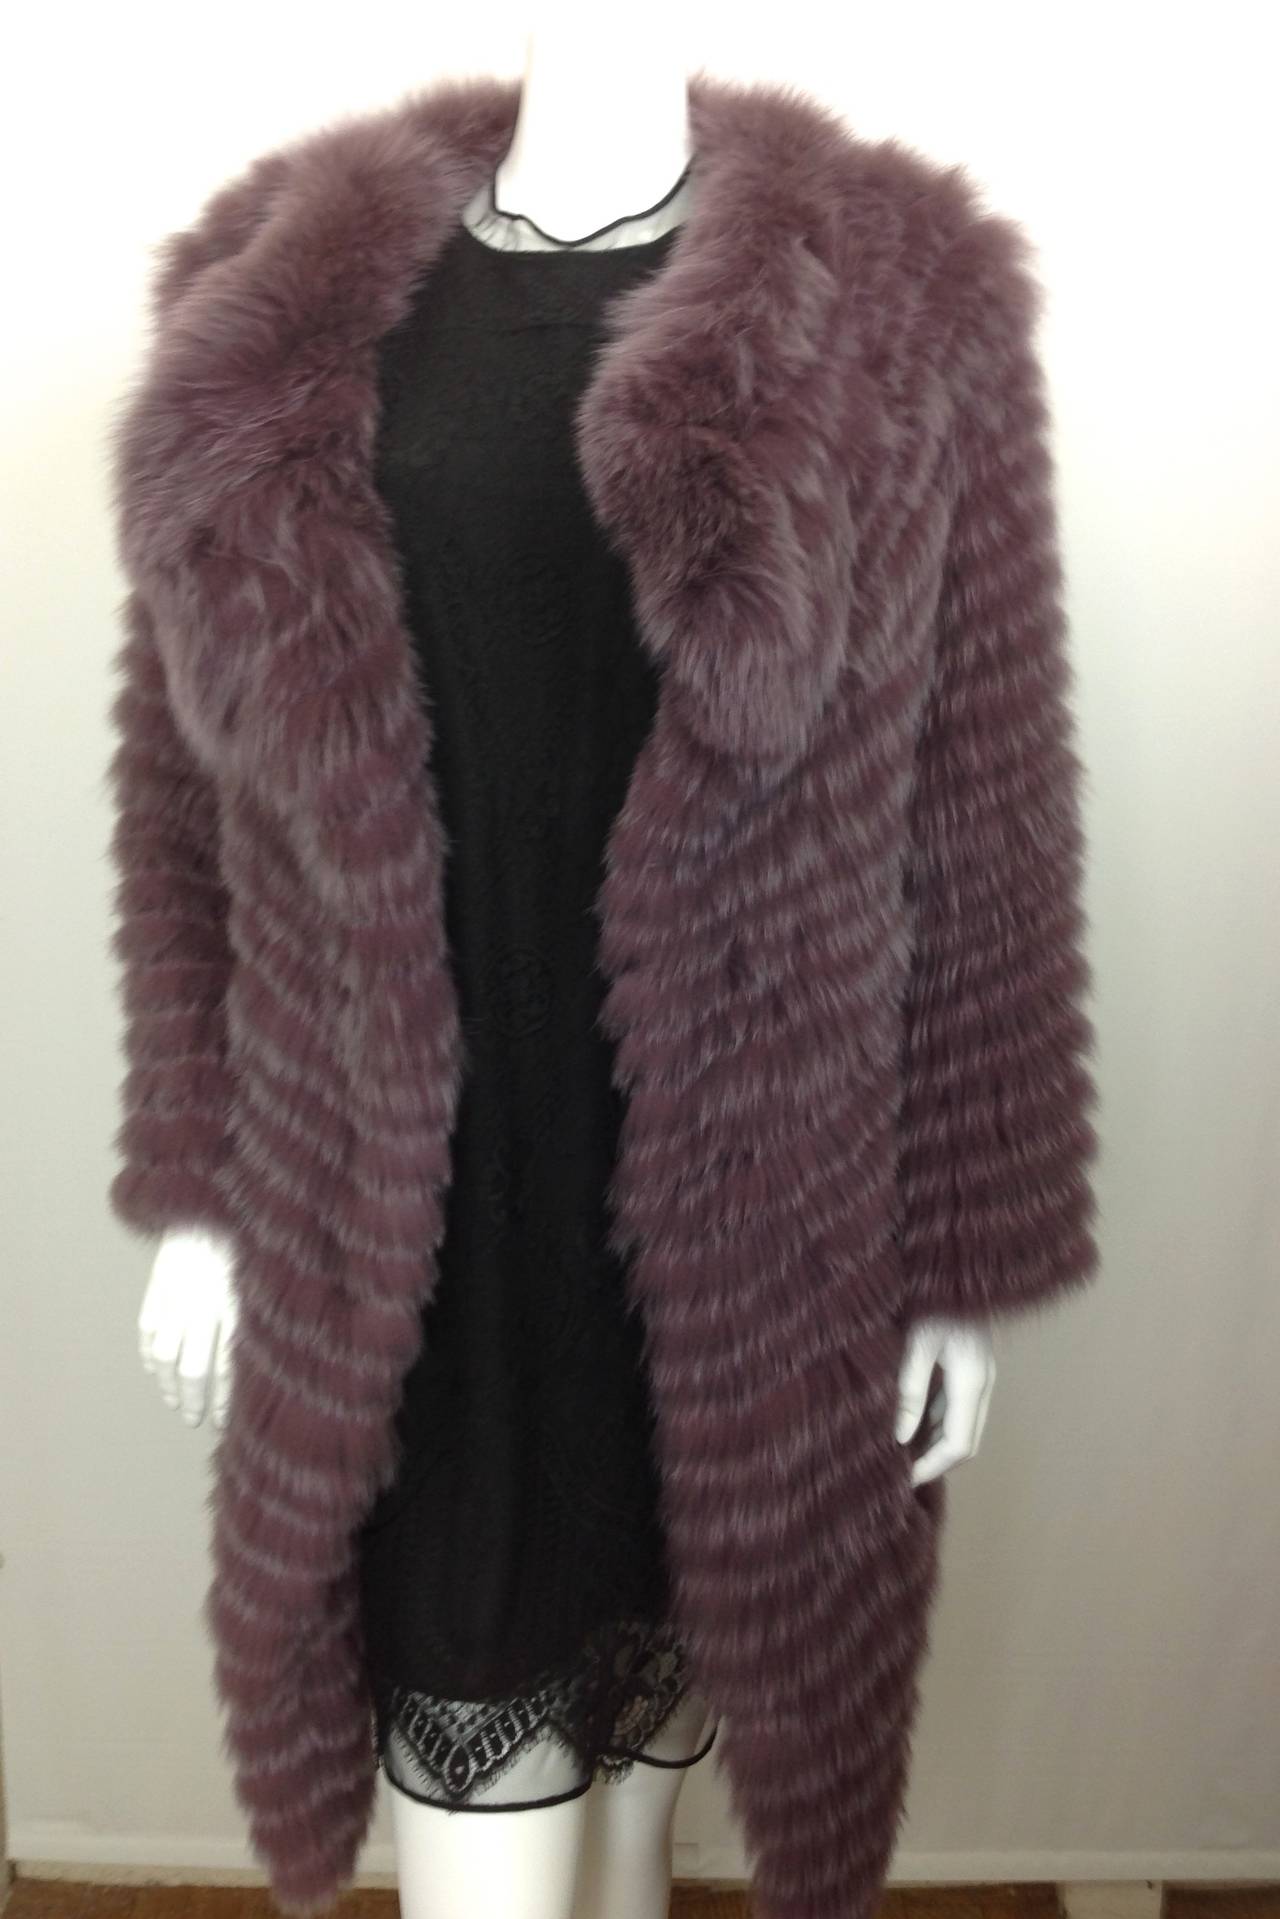 A Fashionista's Delight - Violet Fox Coat, tipped in Gray.
Labels removed...bummer.
Lined in lavender silk charmuse.  Two on seam pockets.  
Three hook & eye's for closure.  One eye missing at the bottom.
24